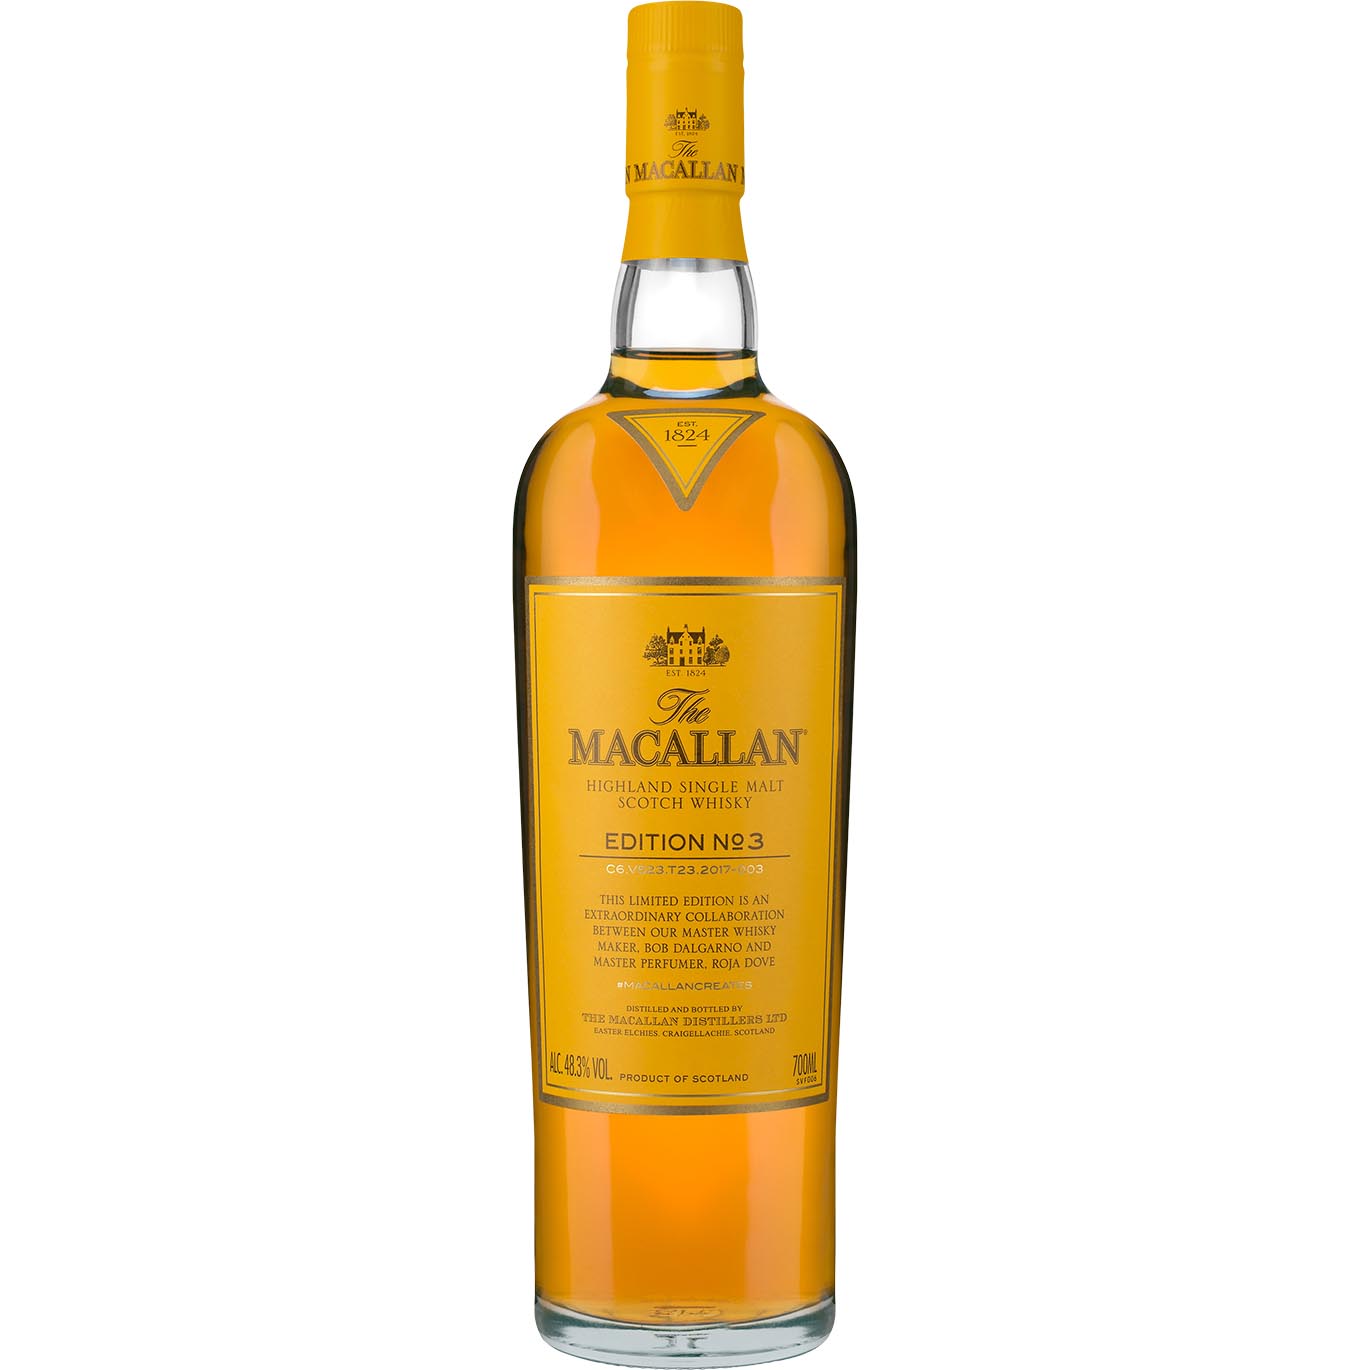 Secondery the_macallan_edition_3_1370px.jpg